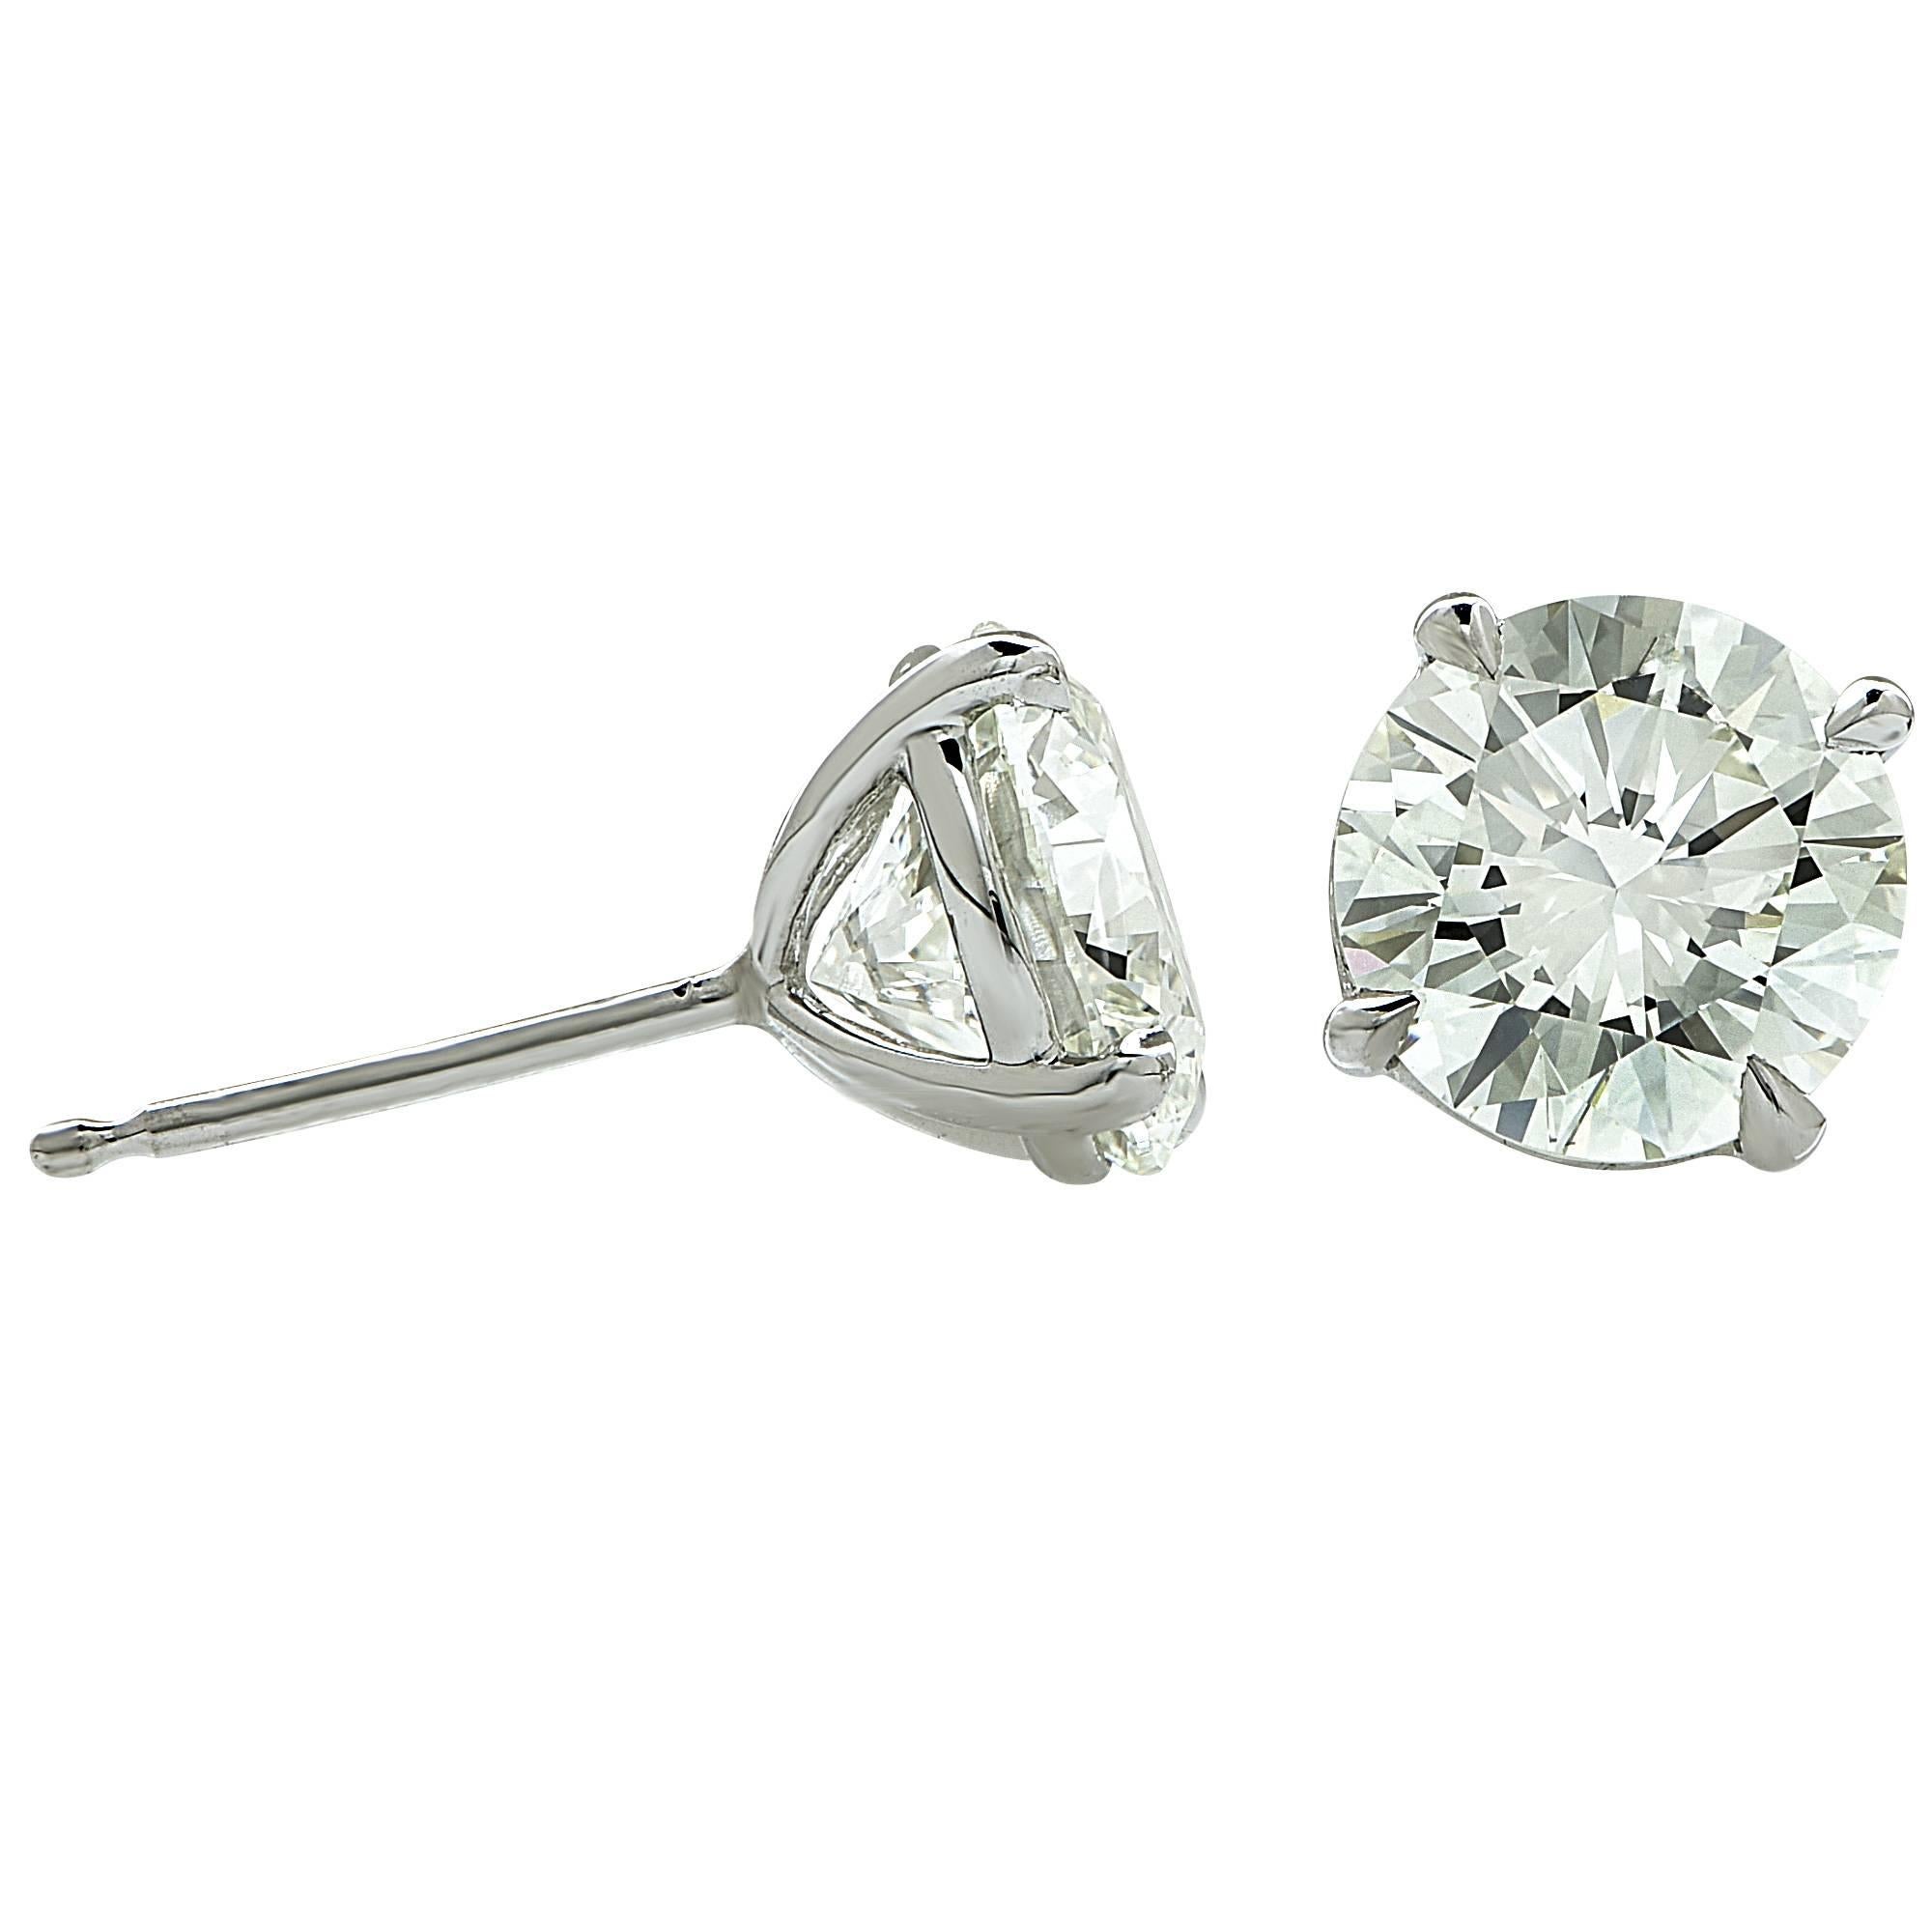 18k white gold earrings containing 2 round brilliant cut diamonds with GIA reports (images attached). The diamonds have a combined total weight of 2.86cts K-L color and VVS clarity.

It is stamped and tested as 18k gold.
The metal weight is 1.58